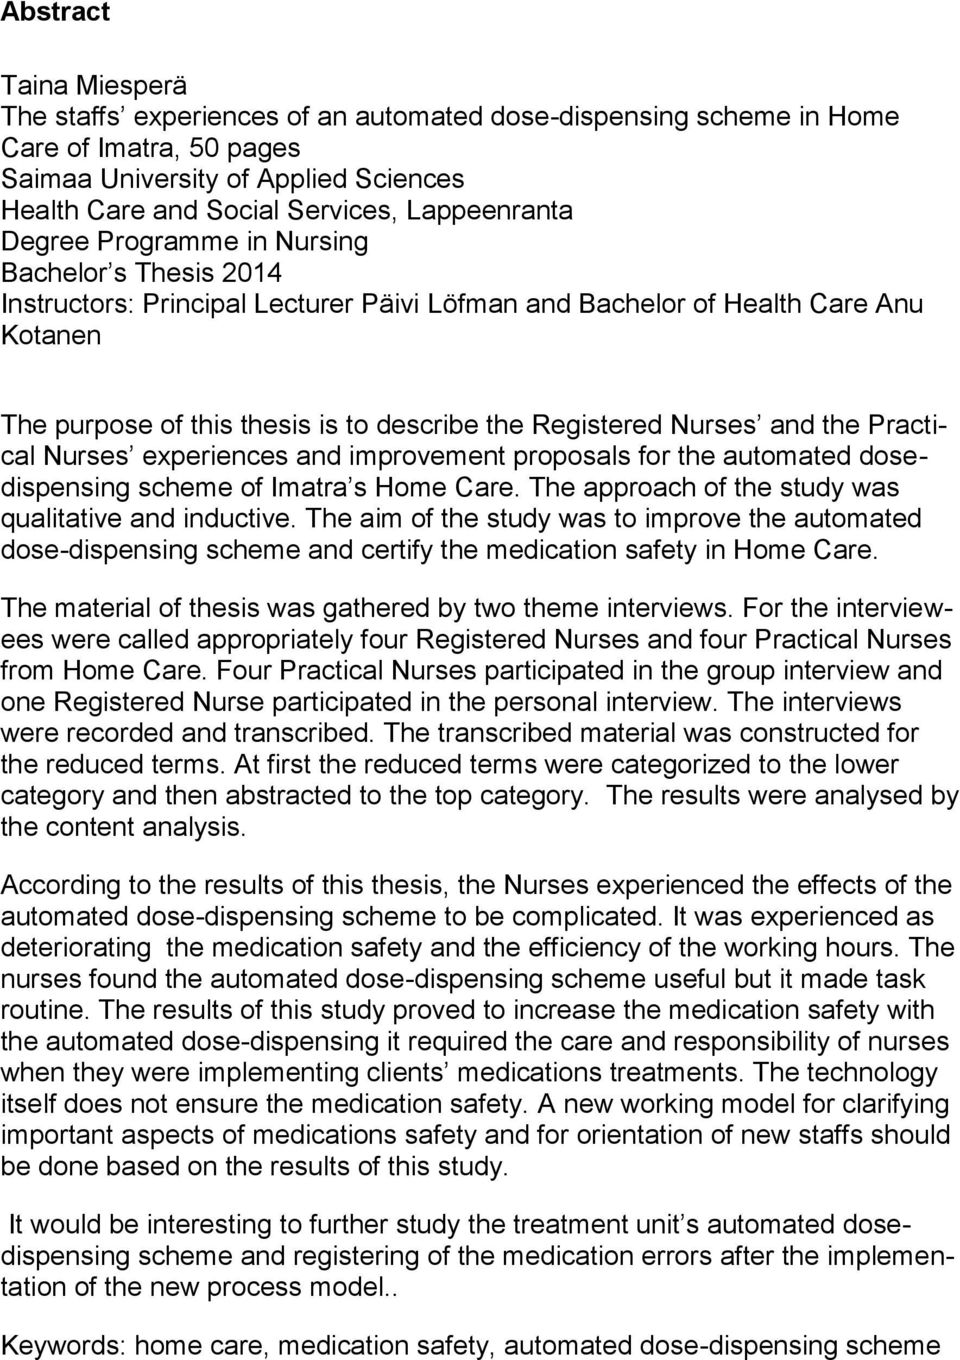 Registered Nurses and the Practical Nurses experiences and improvement proposals for the automated dosedispensing scheme of Imatra s Home Care. The approach of the study was qualitative and inductive.